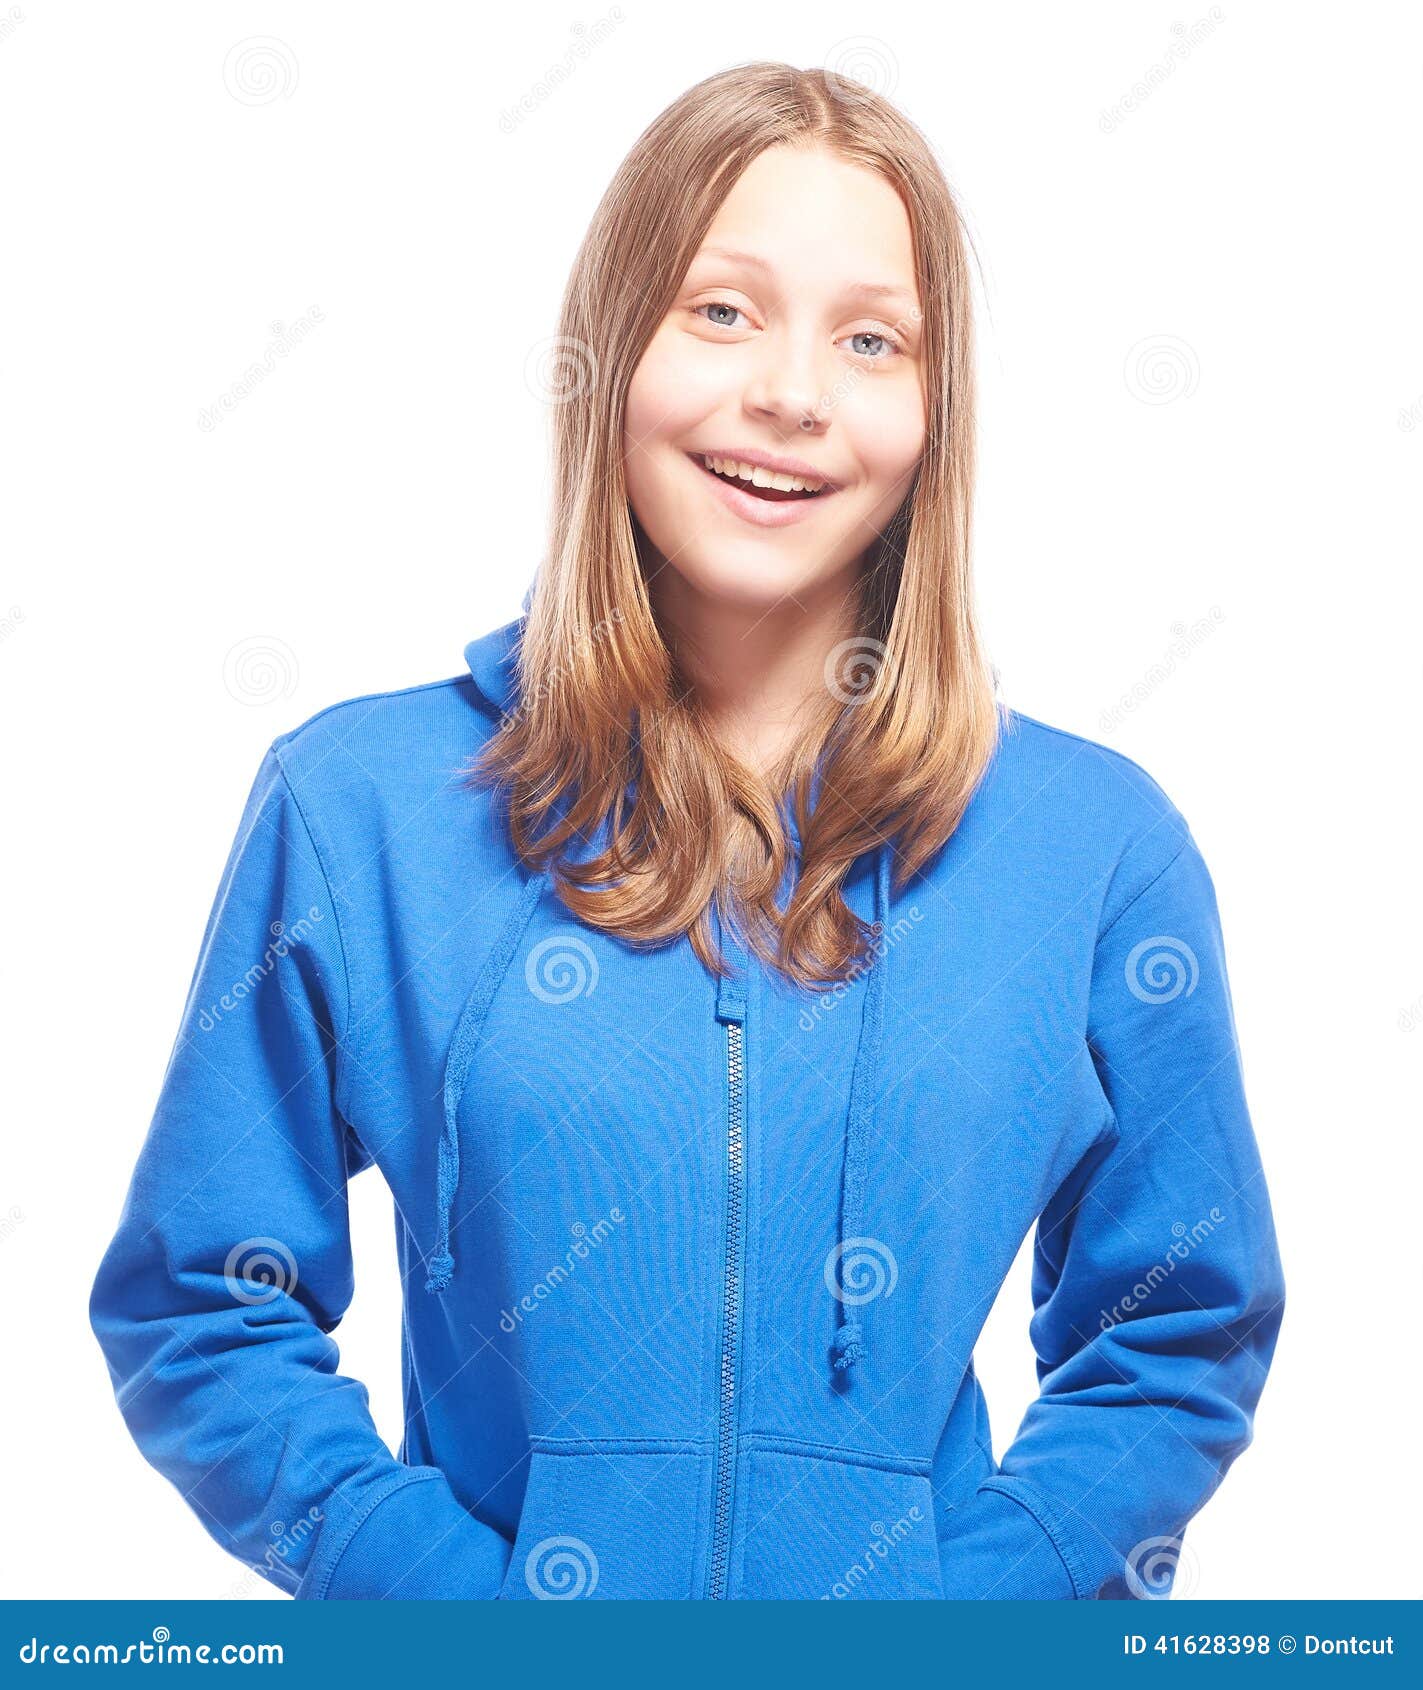 Happy teen girl laughing stock photo. Image of natural - 41628398